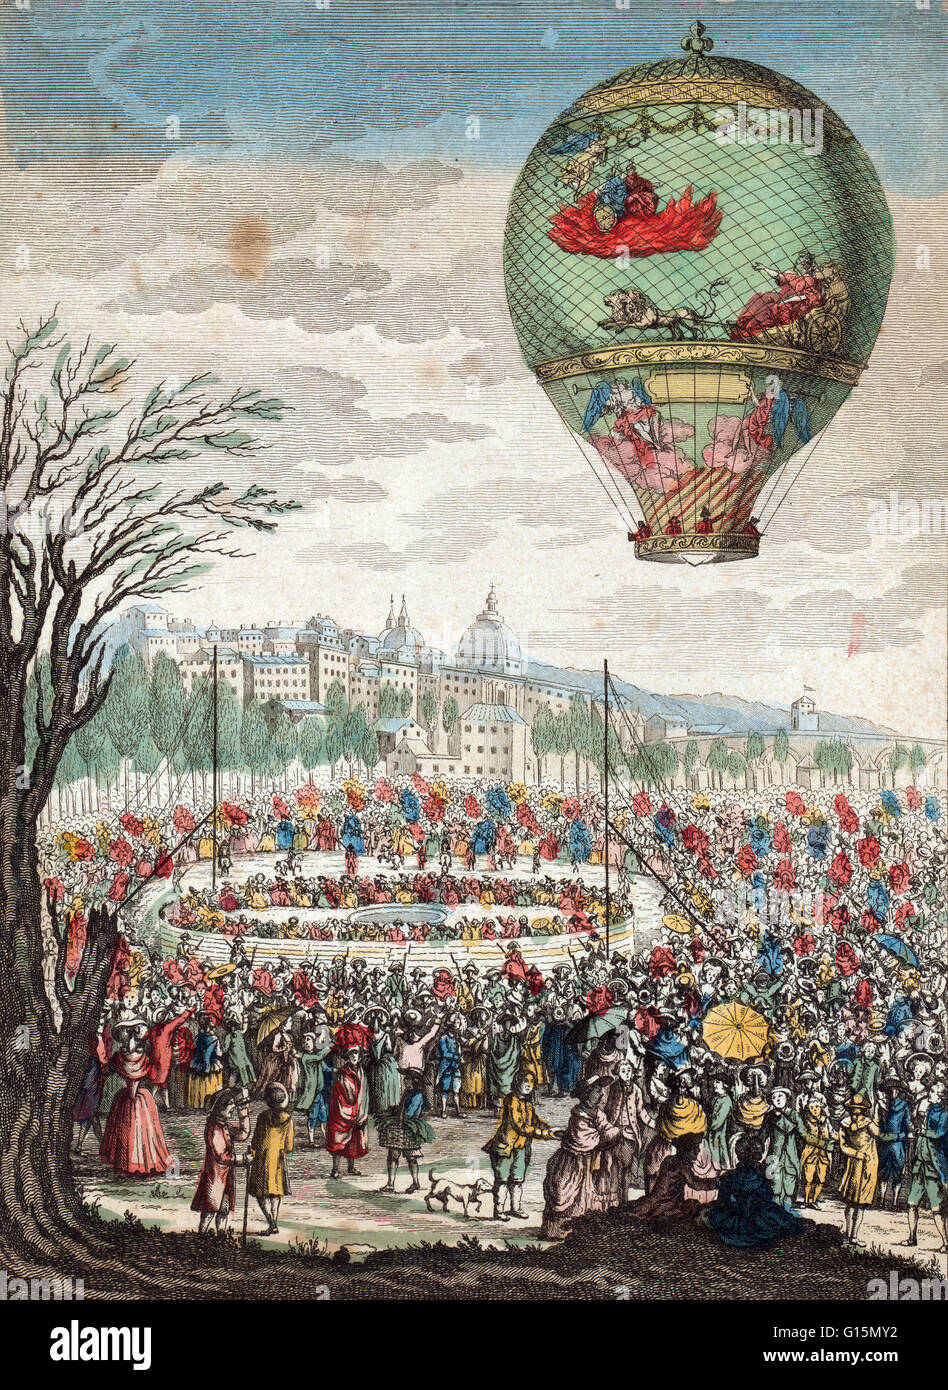 The balloon, 'Le Flesselles' ascending over Lyon, France, on January 19, 1784, carrying seven passengers including Joseph Montgolfier and Jean François Pilâtre de Rozier. The Flesselles balloon (named after the unfortunate Jacques de Flesselles, later to Stock Photo